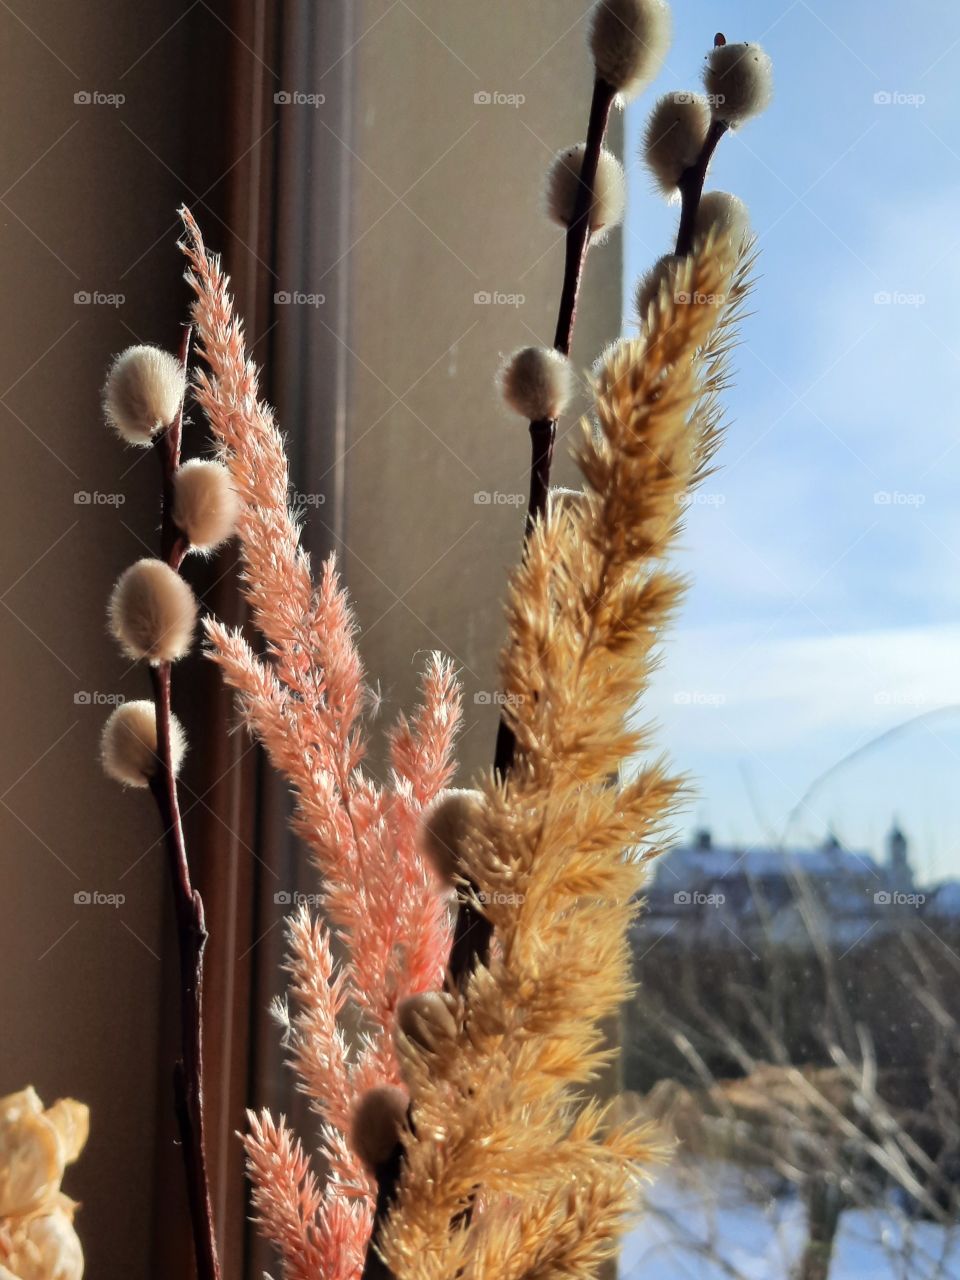 sunlit dry catkins  and grass ears in a bouquet  at windowsill